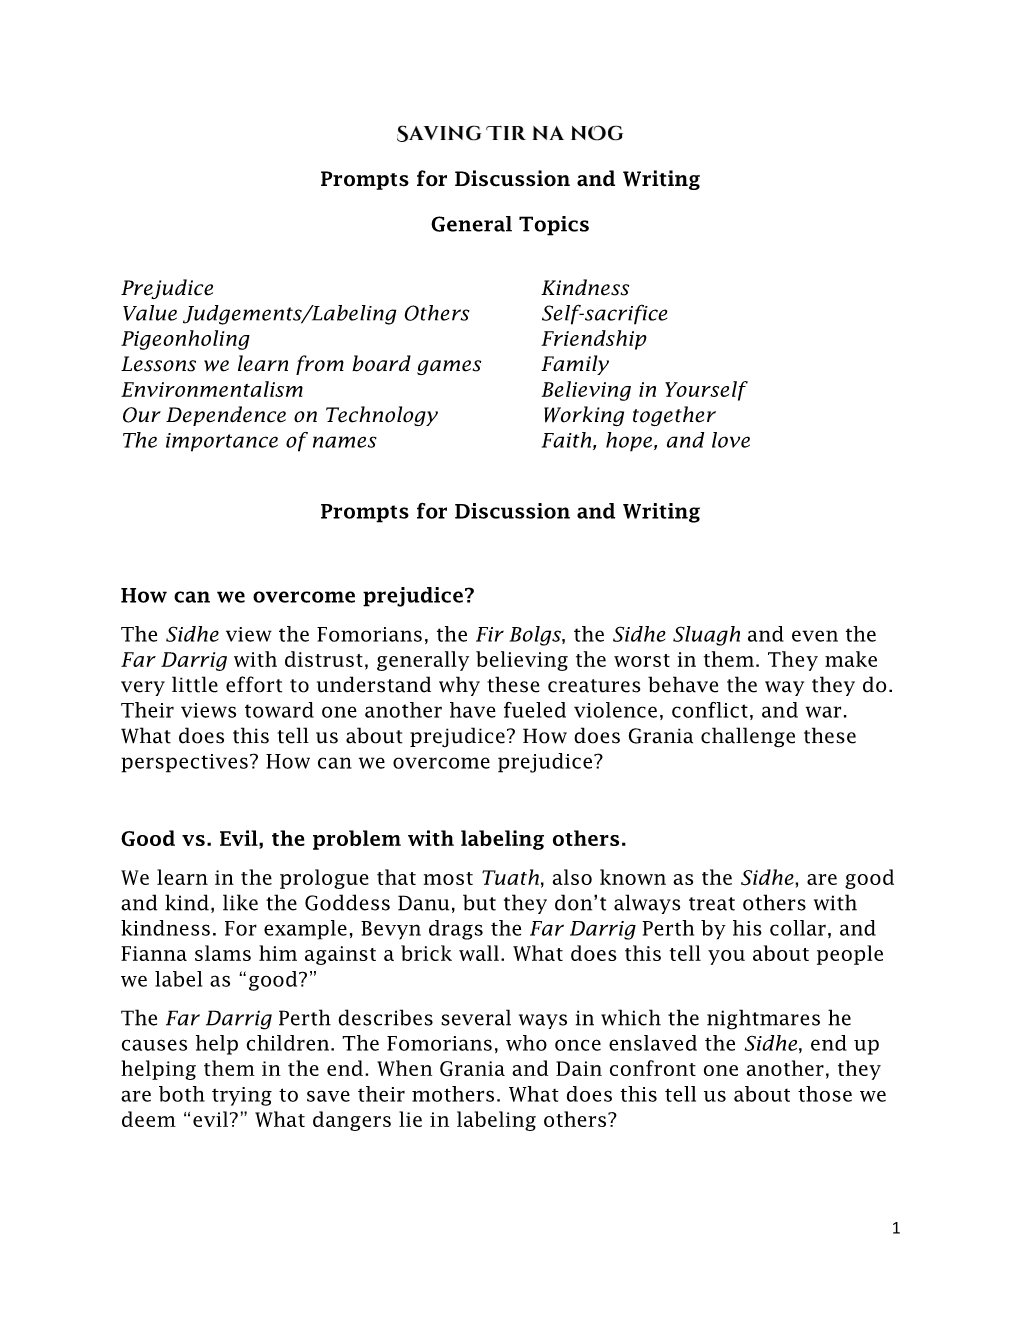 Prompts for Discussion and Writing General Topics